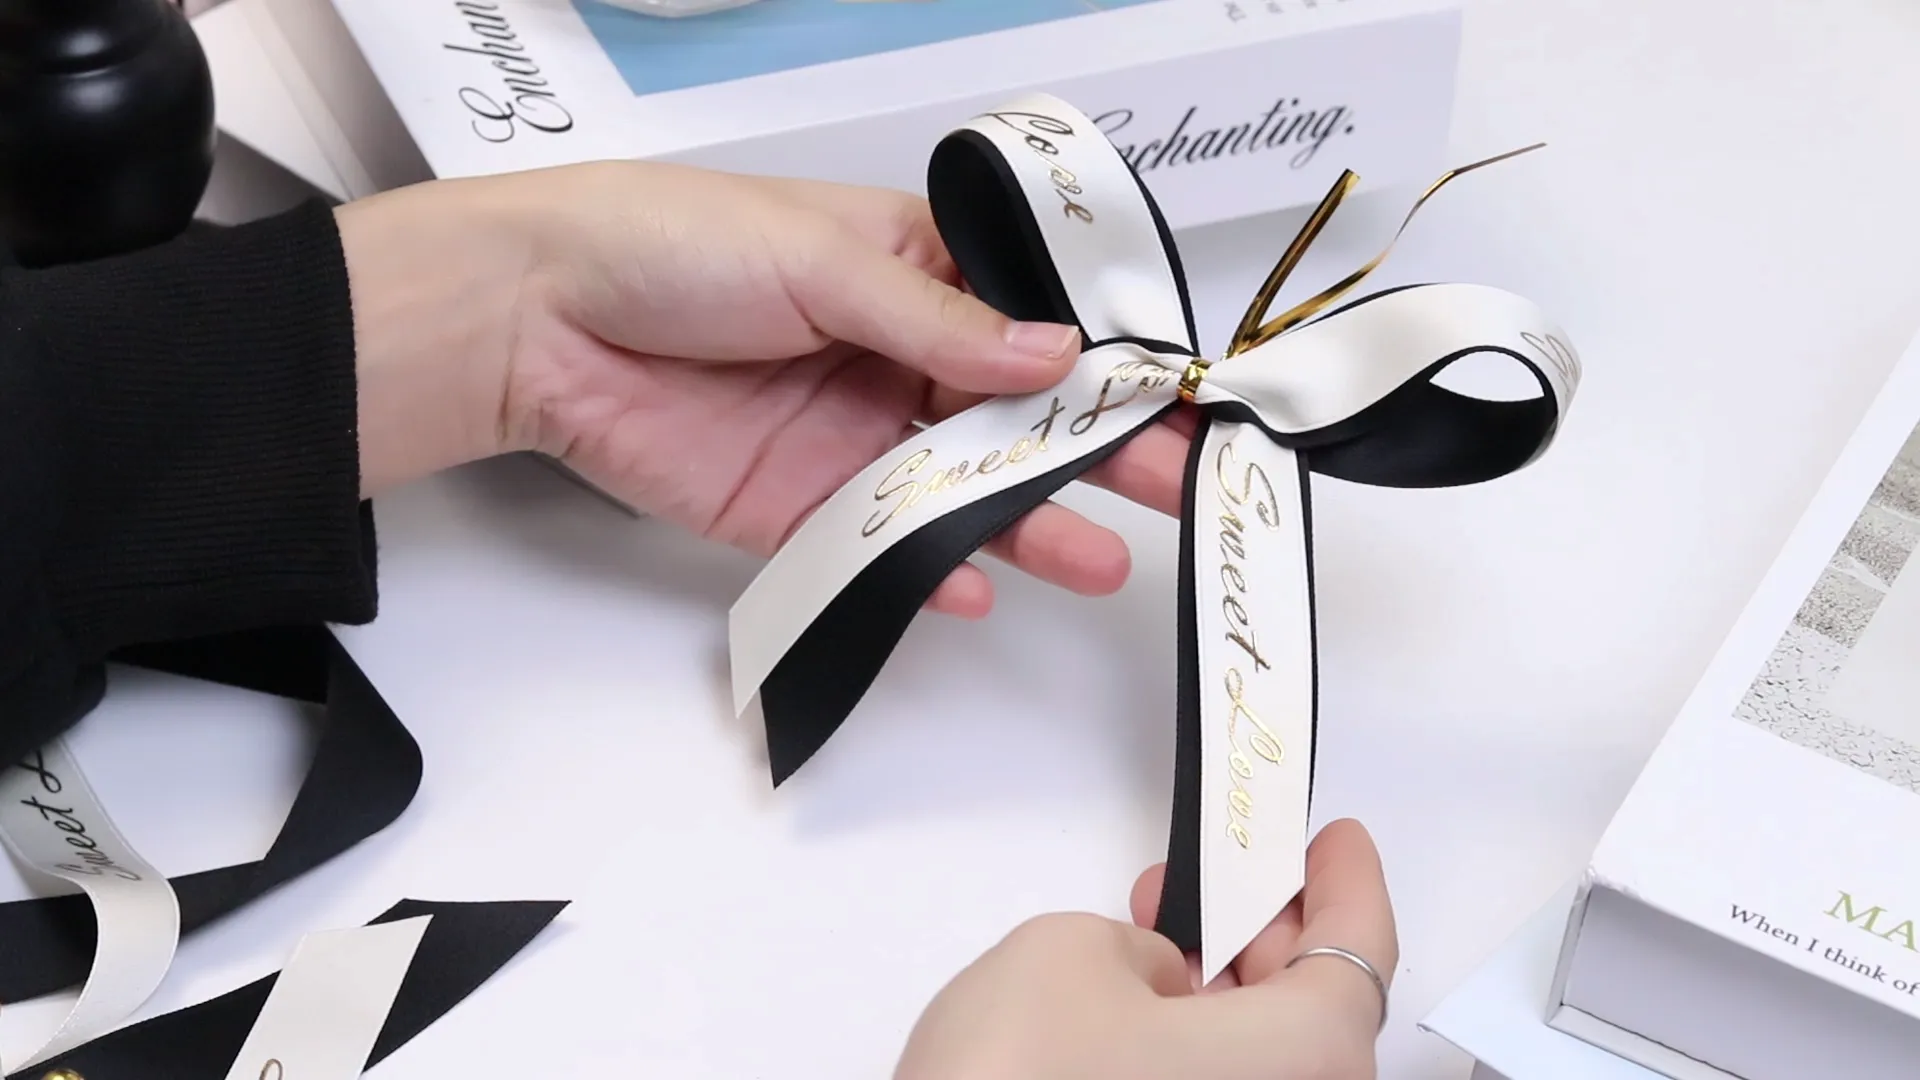 High Quality Printed Pre-Tied Stretch Christmas Party Wedding Gift Wrapping  Ribbon Bow with Elastic Loop for Perfume Bottle - China Bow with Elastic  Loop and Pre-Tied Bow price